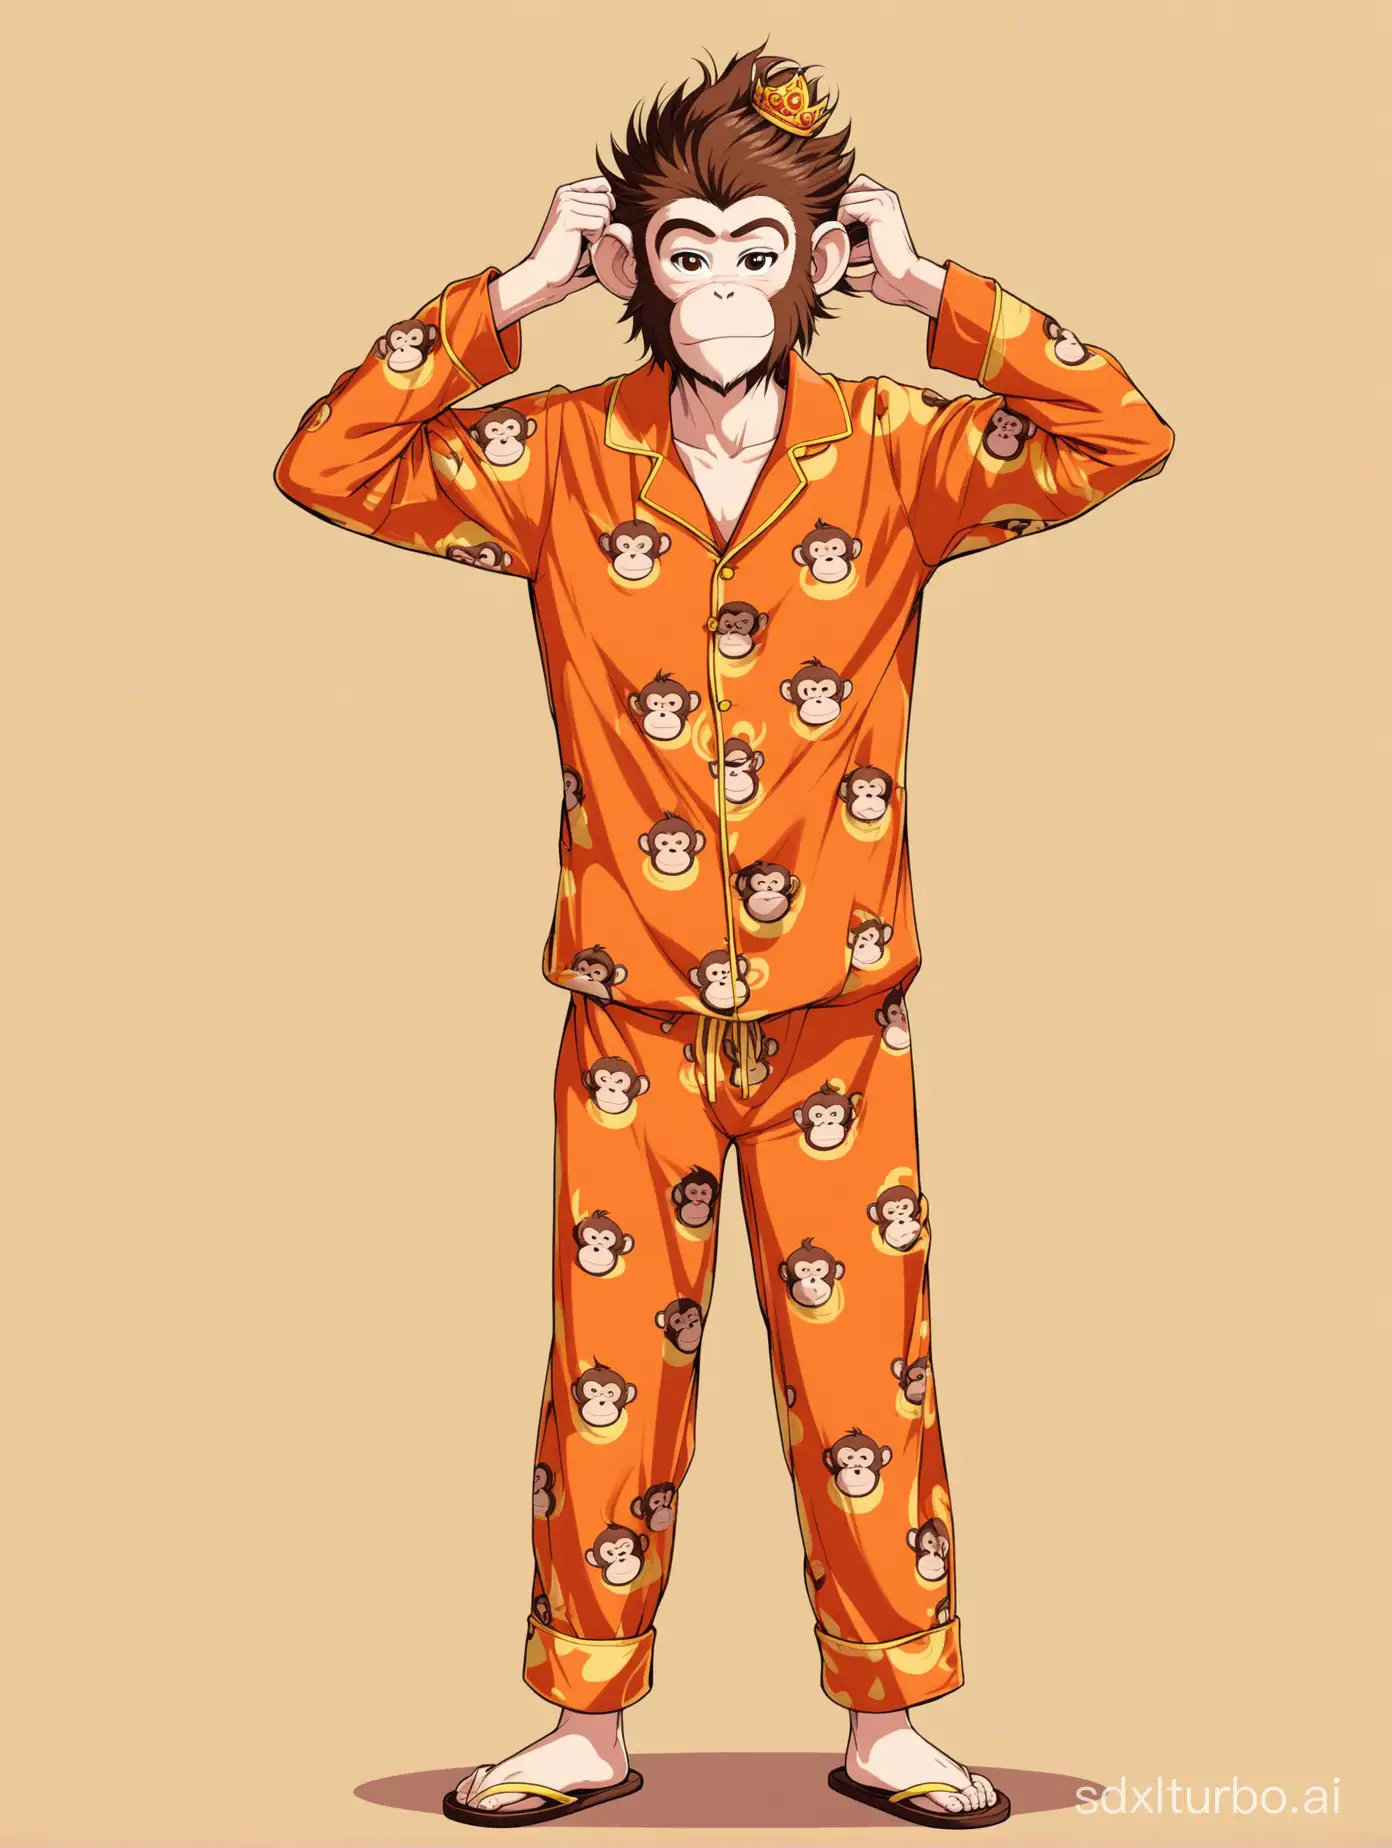 A monkey wearing pajamas, lazily standing at attention, wearing slippers, arms hanging vertically against the body, hands in pockets, appearing rather lazy, with a tuft of hair sticking up on the head; A modern version of the Monkey King, may appropriately add some modern vibe; youthful and energetic,